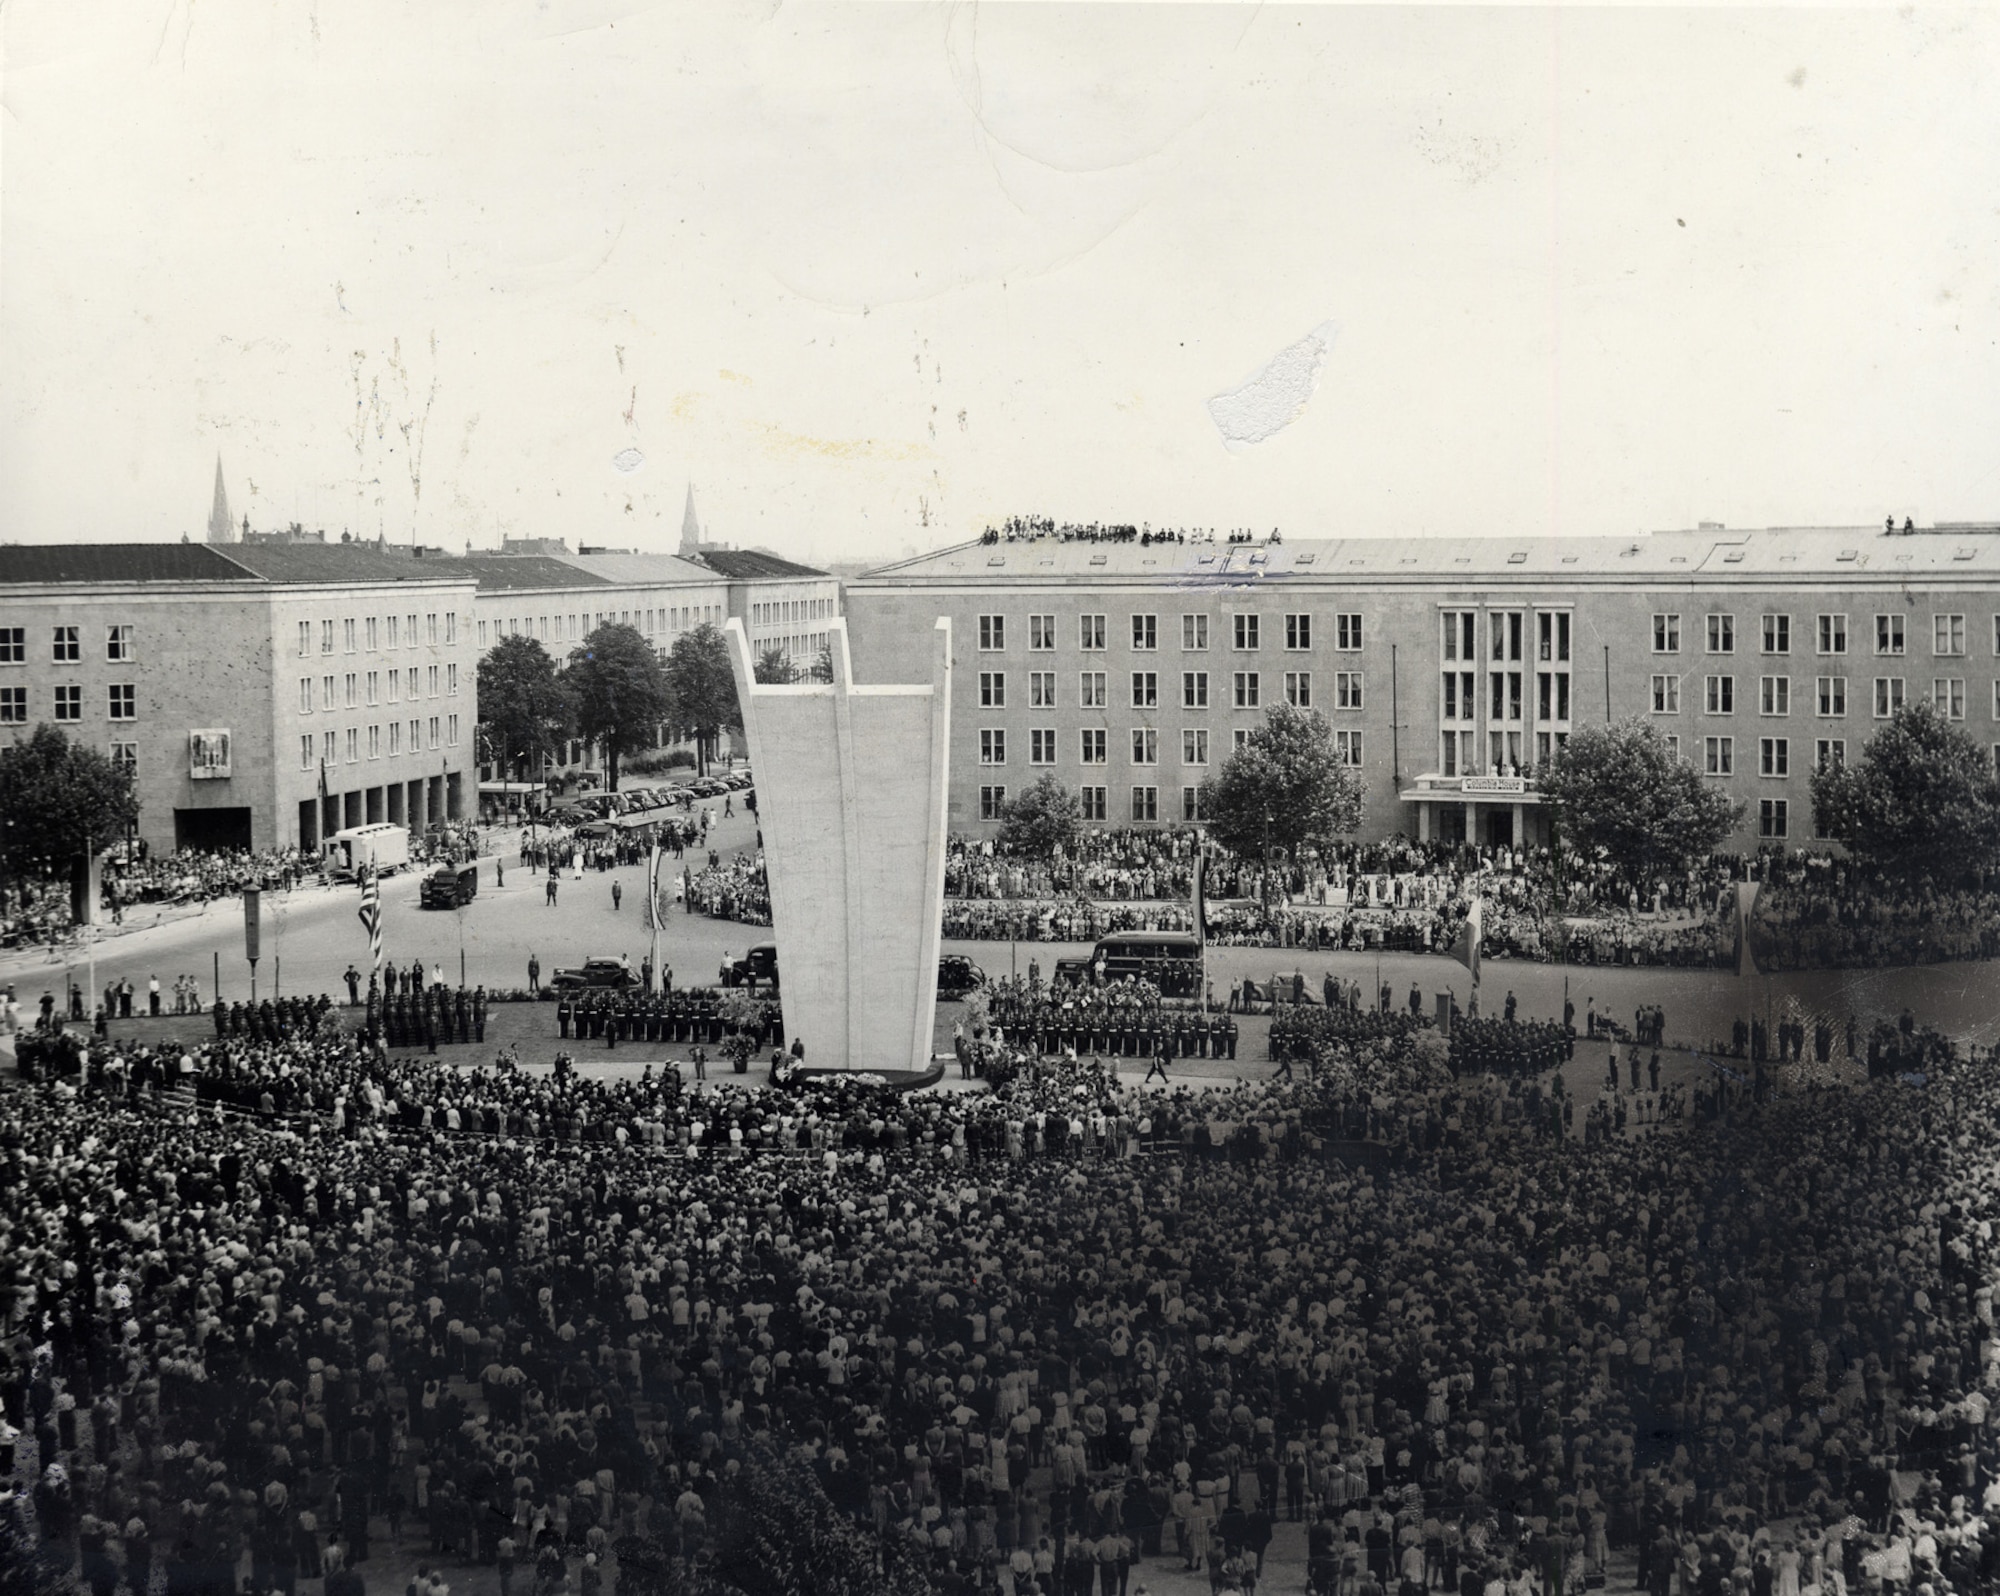 The dedication of the Berlin Airlift Memorial in the Lufbruke Platz during the fall of 1952. (U.S. Air Force photo)